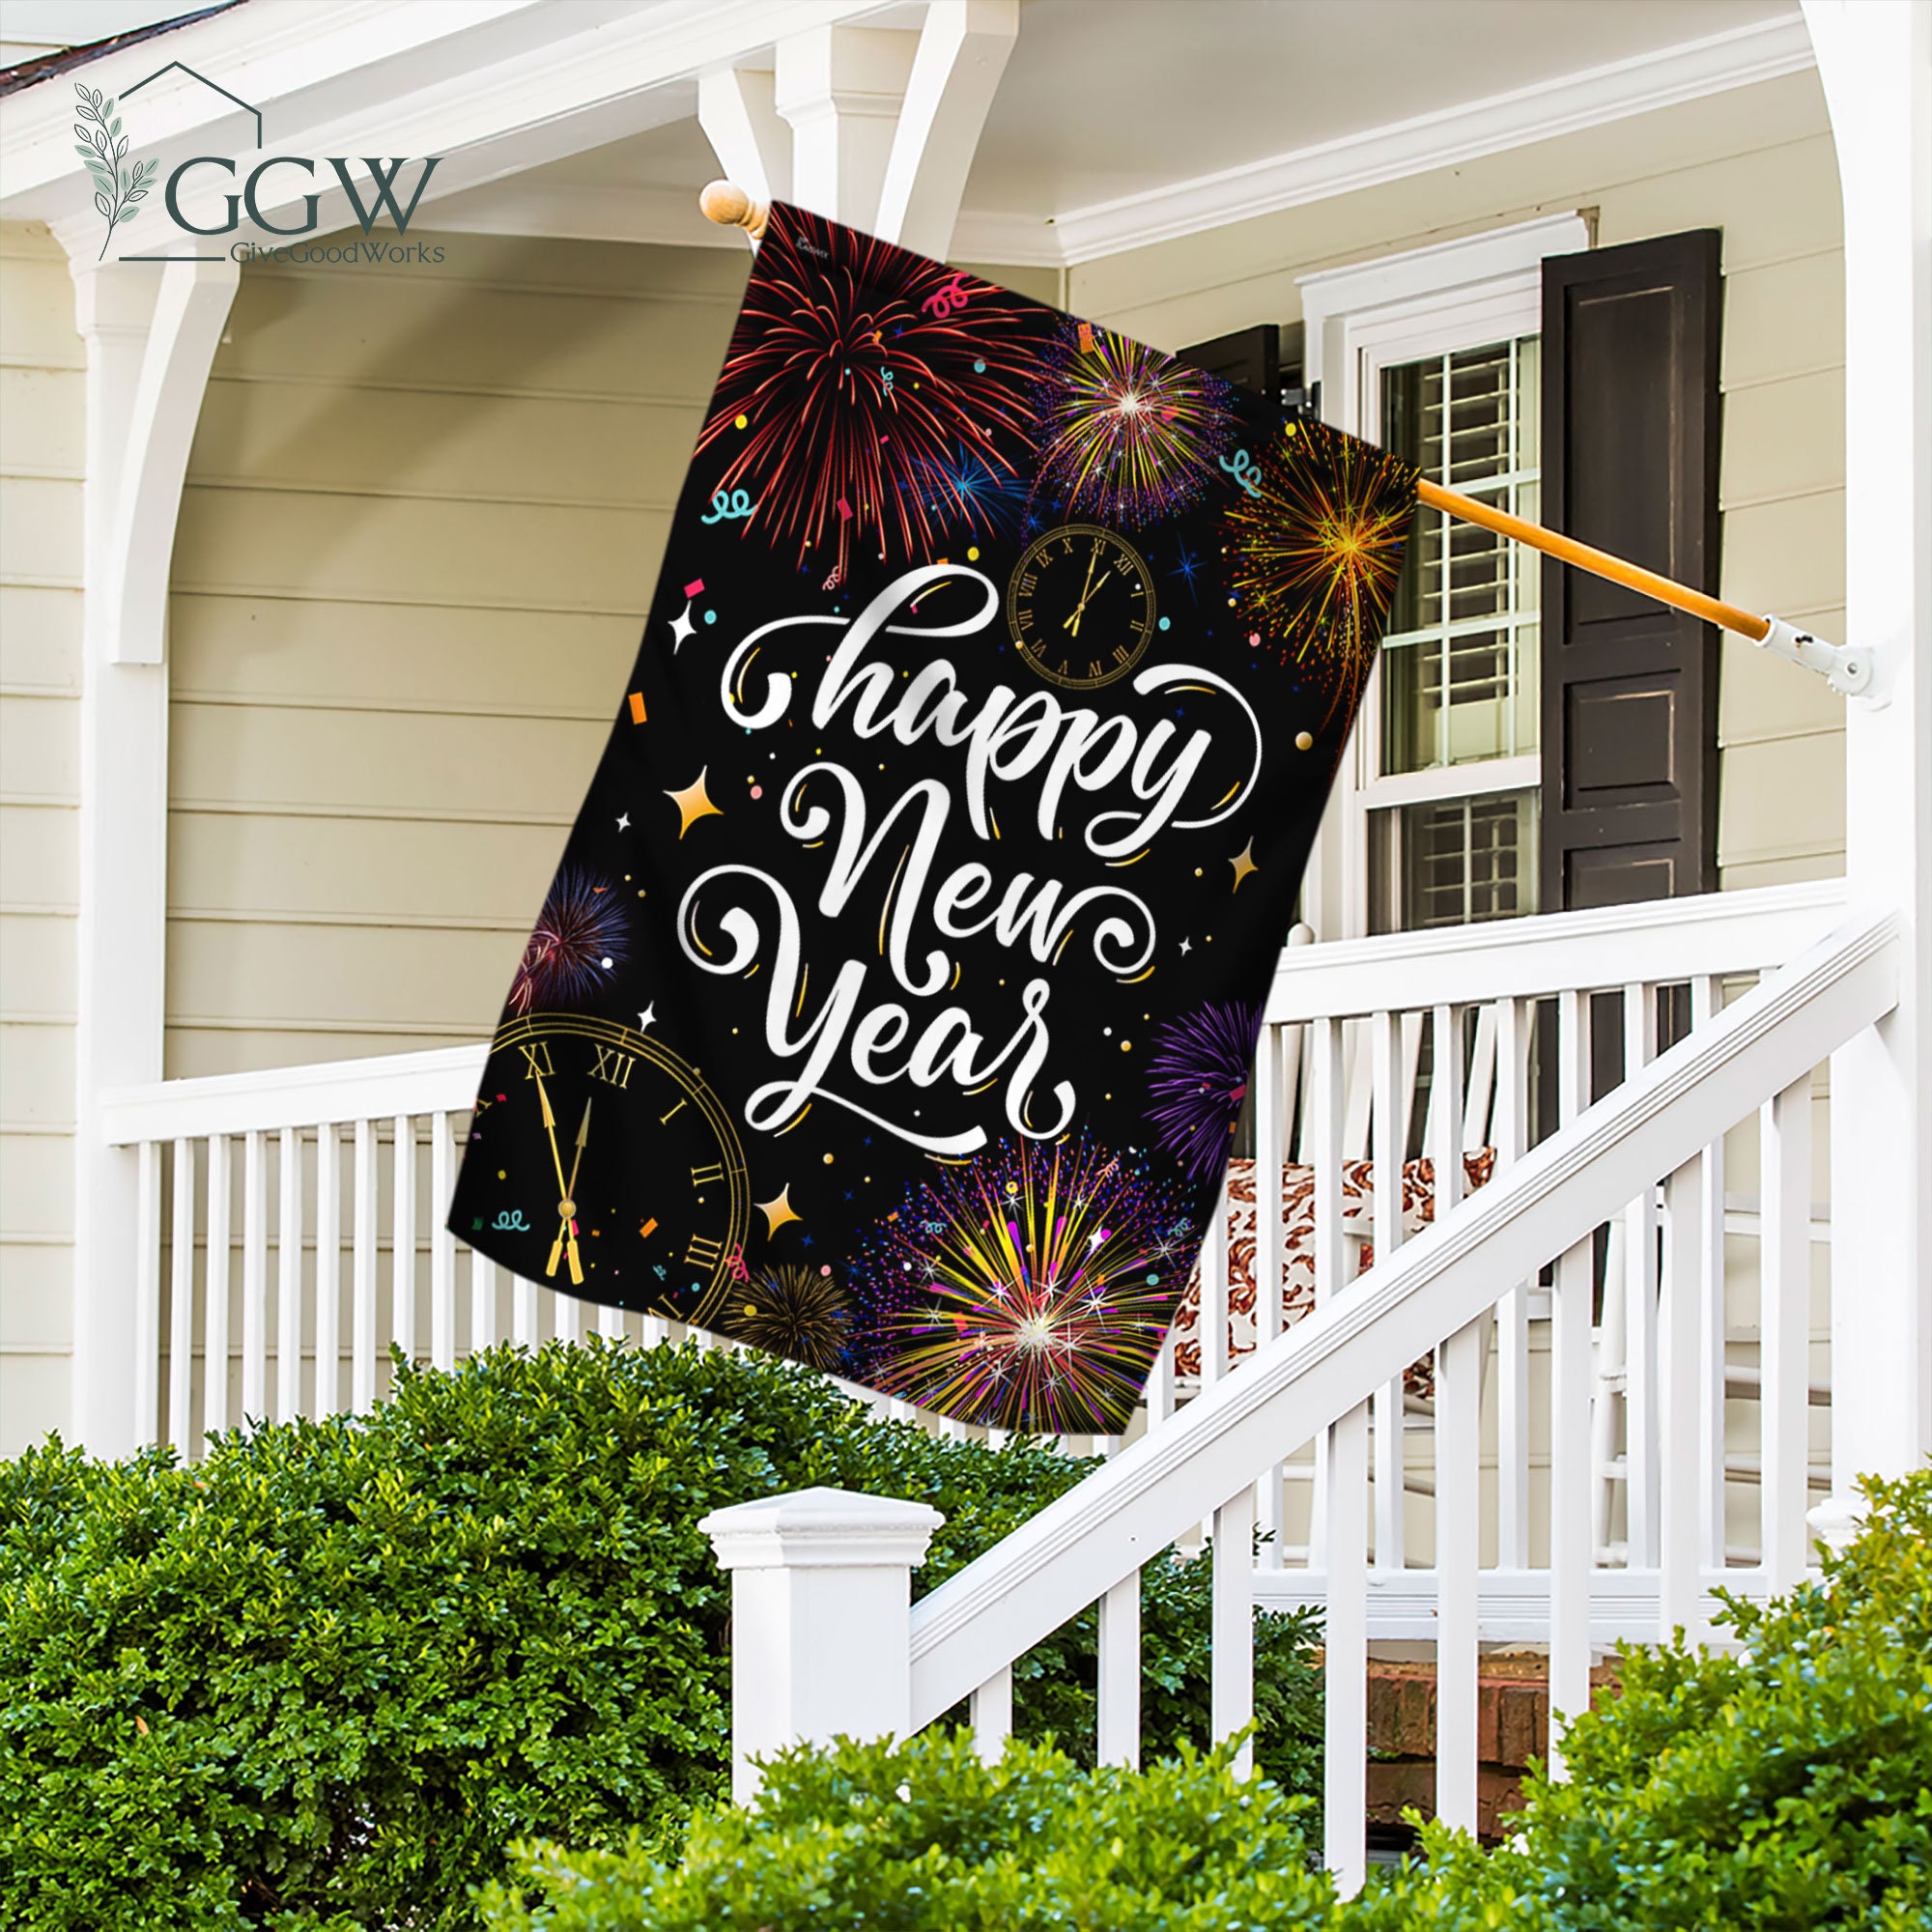 Discover Happy New Year Flag, New Year House Flag, New Year Garden Flag